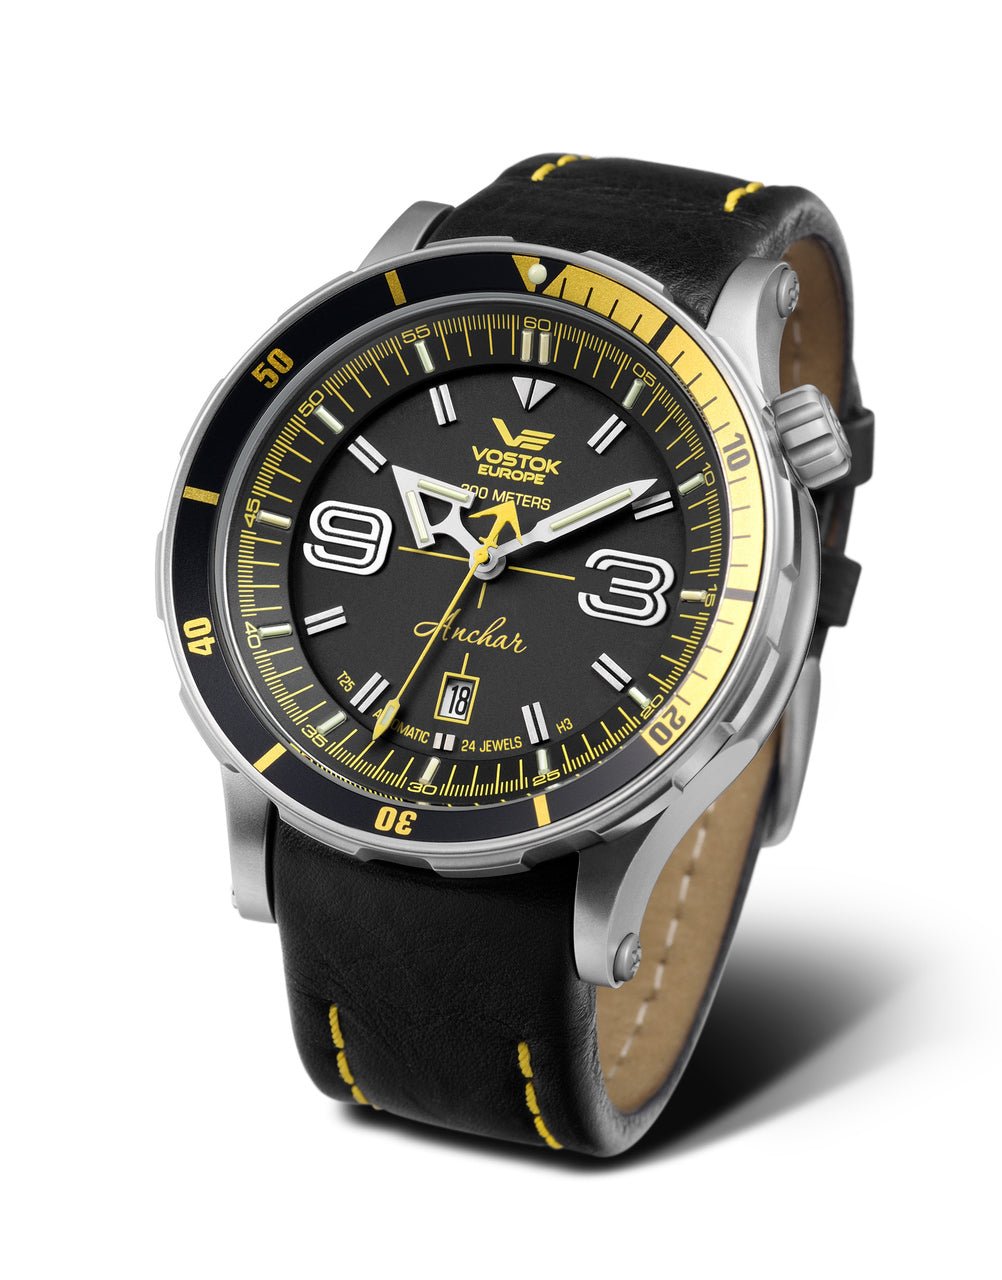 Vostok-Europe Anchar Mens Diver Watch NH35A/510A522 - Maple City Timepieces